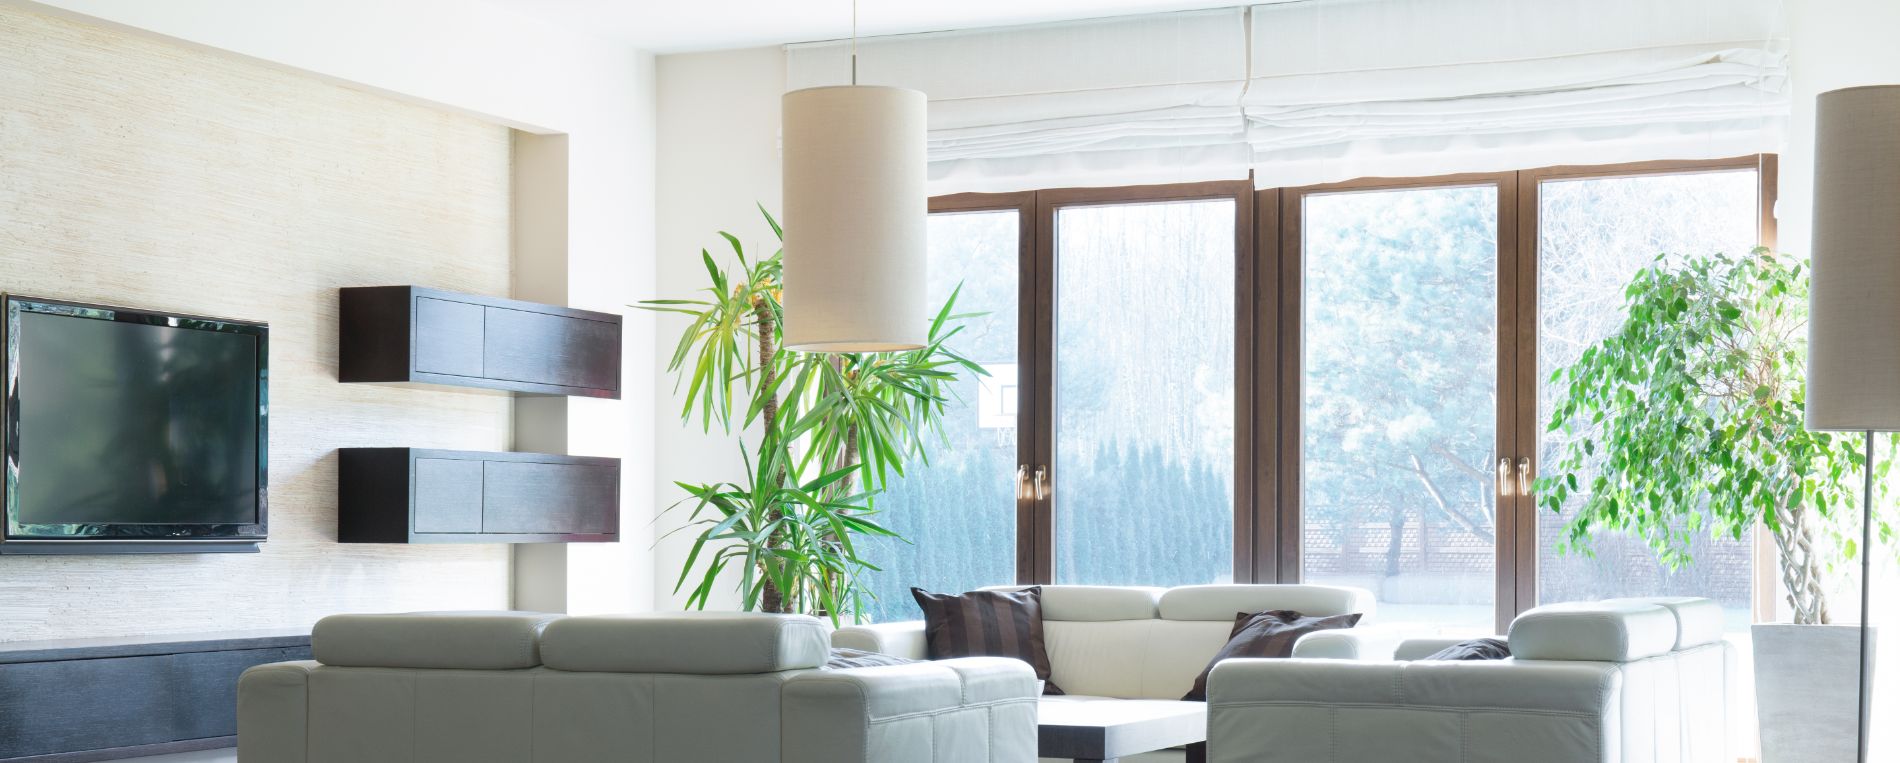 Wi-Fi Motorized Somfy Blinds For Cambrian Park Home